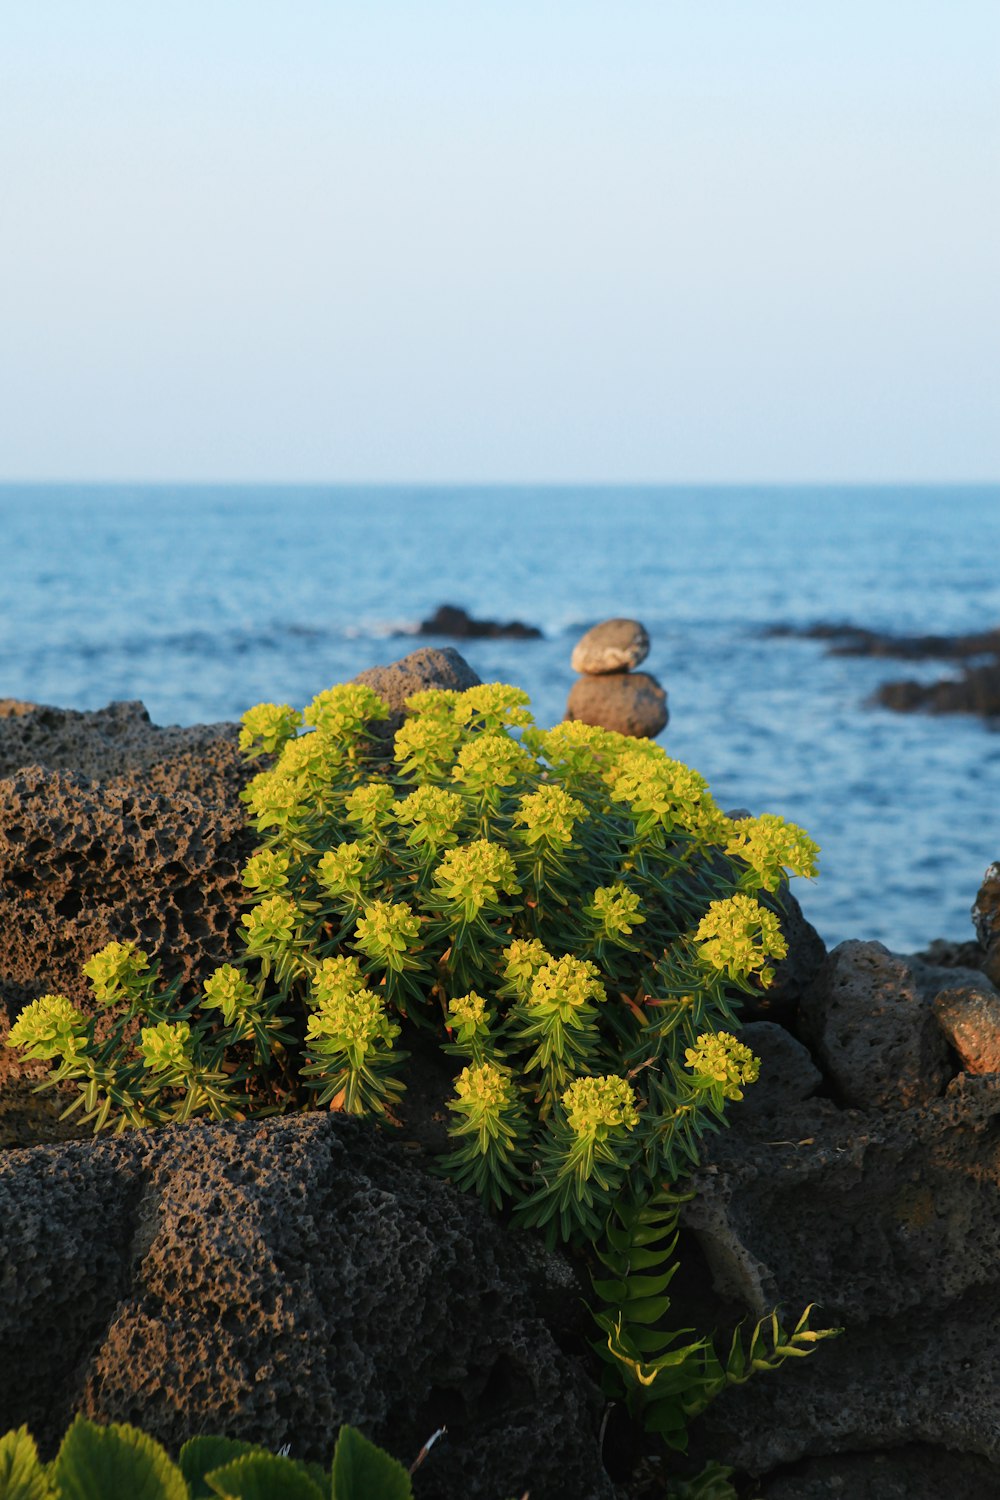 green plant on gray rock near body of water during daytime